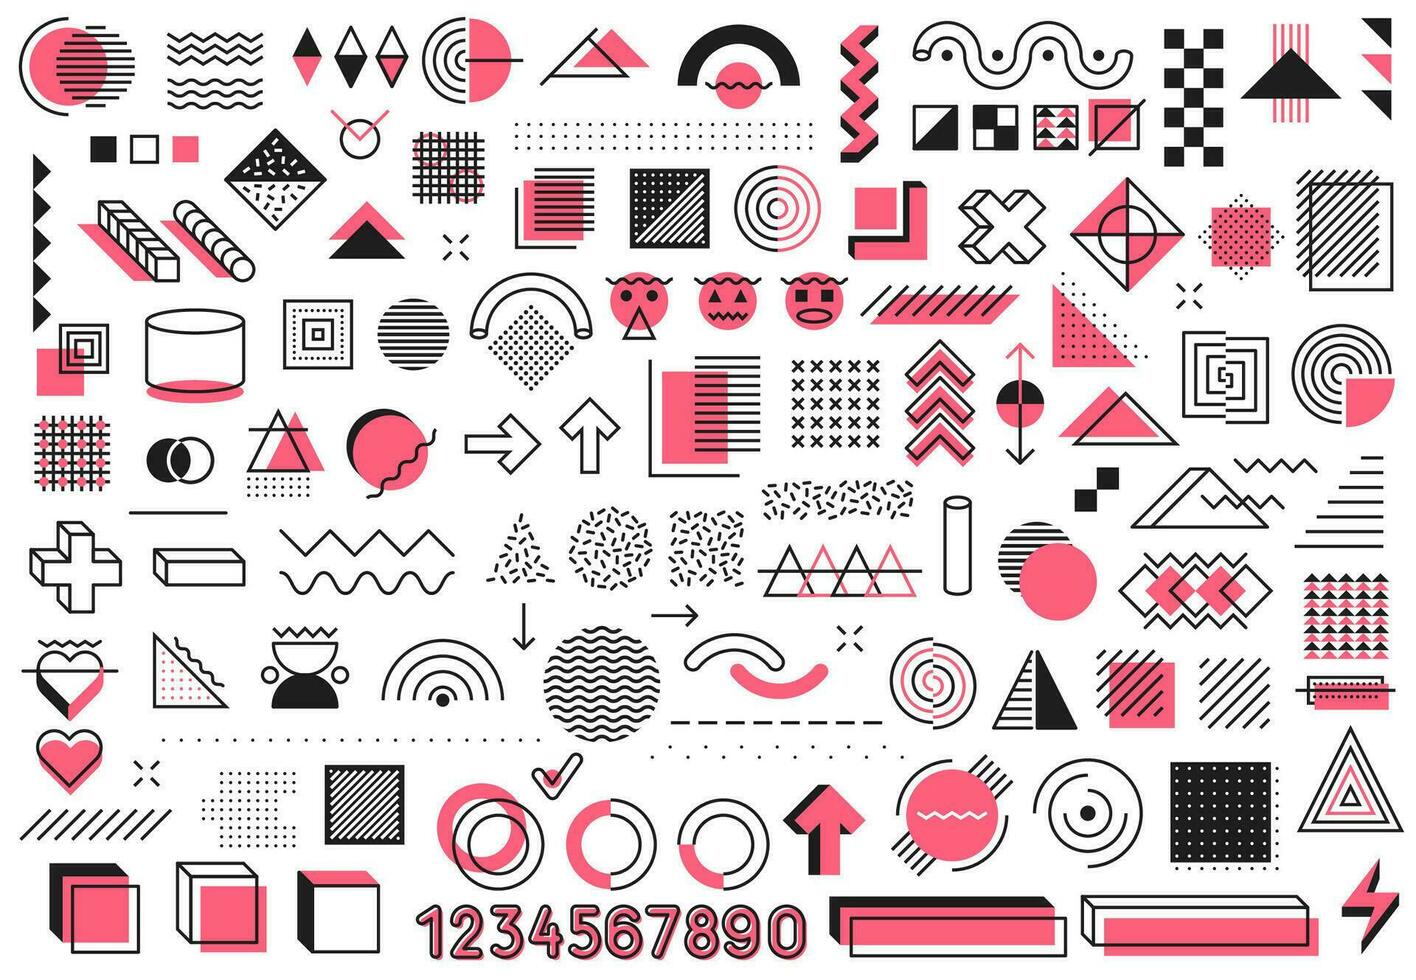 Memphis geometric shapes, patterns and elements vector